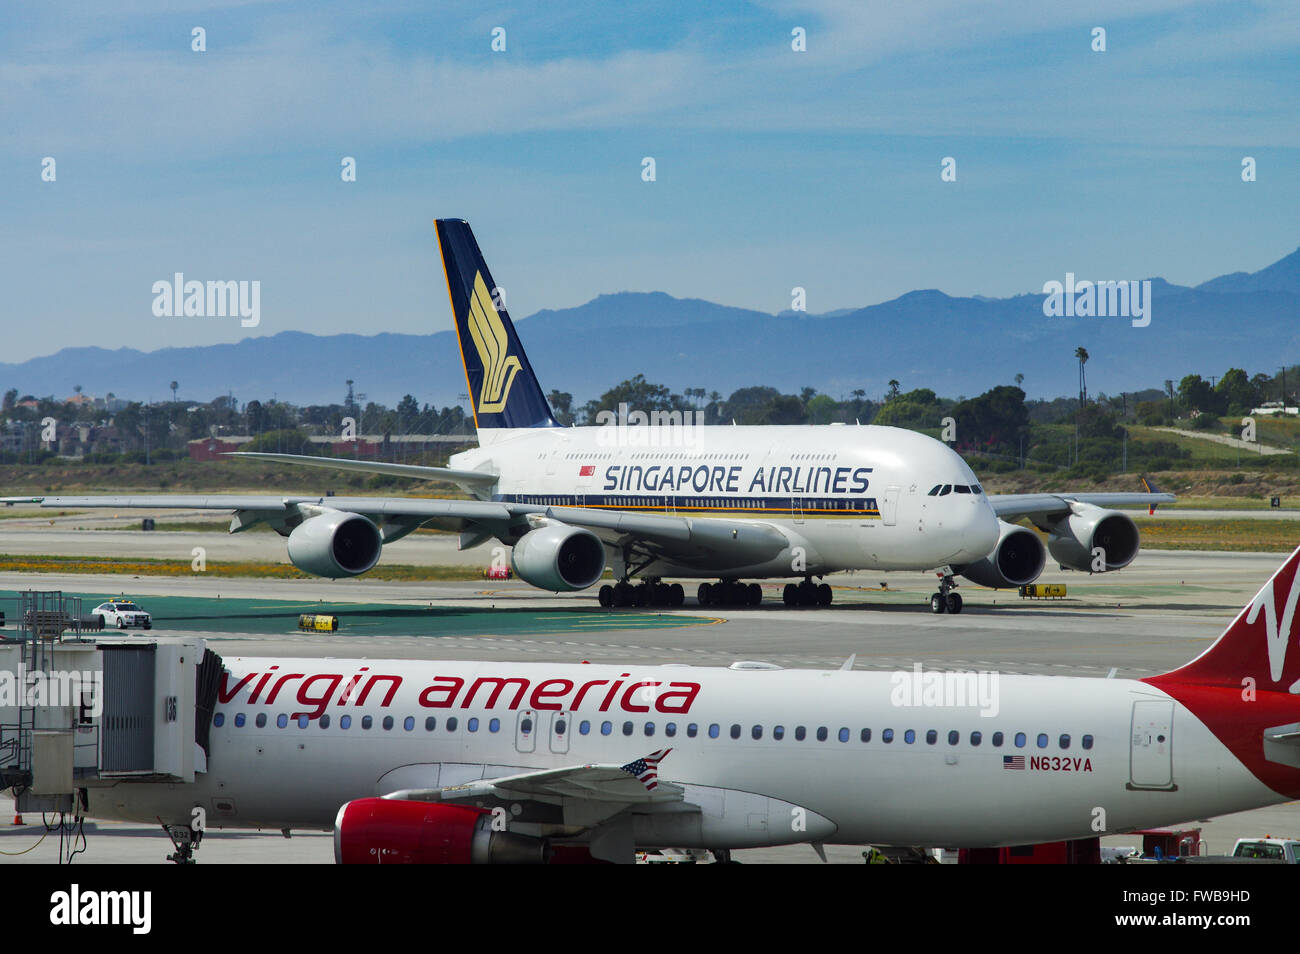 Virgin America A320 with Singapore Airlines A380 in the background on the tarmac in Los Angeles Airport Stock Photo